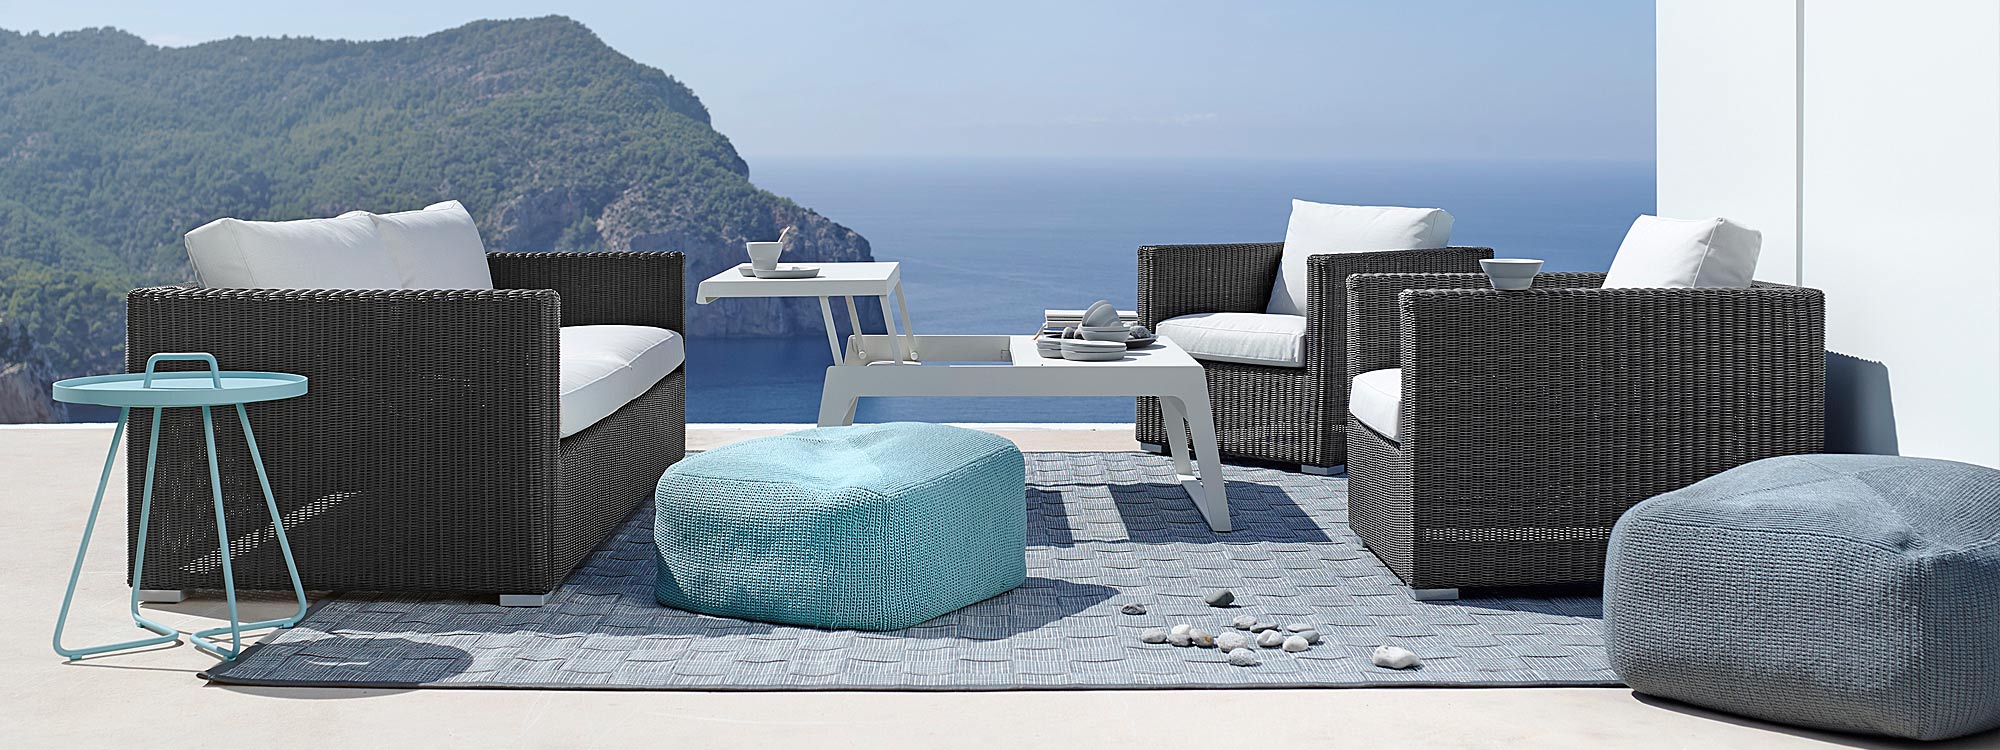 Image of Cane-line Chester black rattan garden sofa, On The Move tray table and Divine outdoor pouf on terrace with sea and cliffs in background